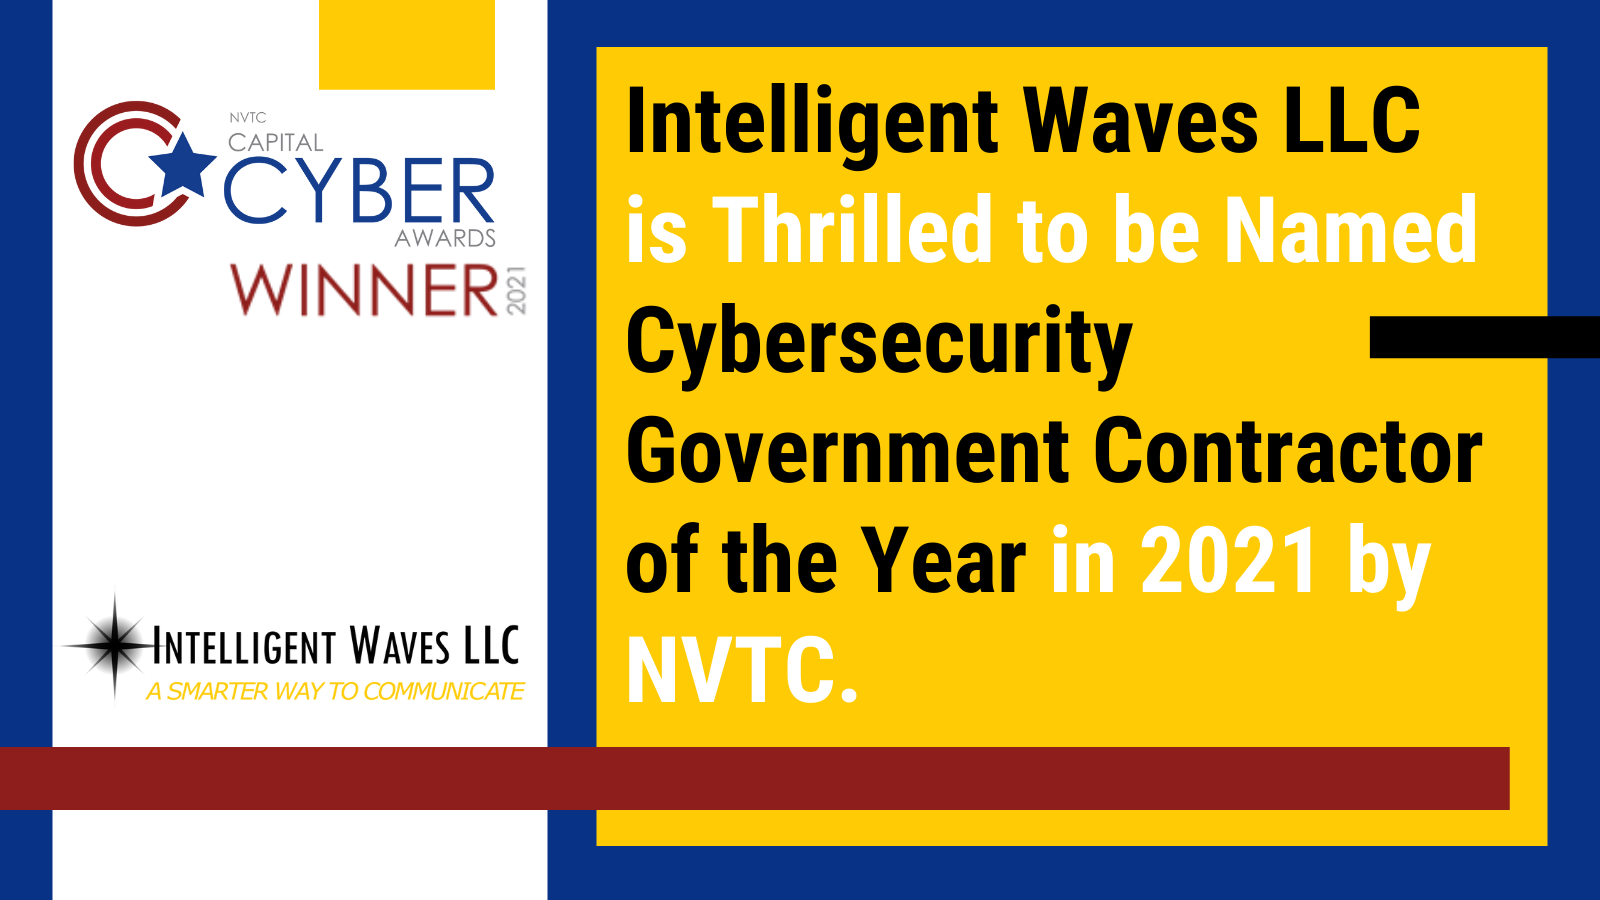 Cybersecurity Government Contractor of the Year Award Winner